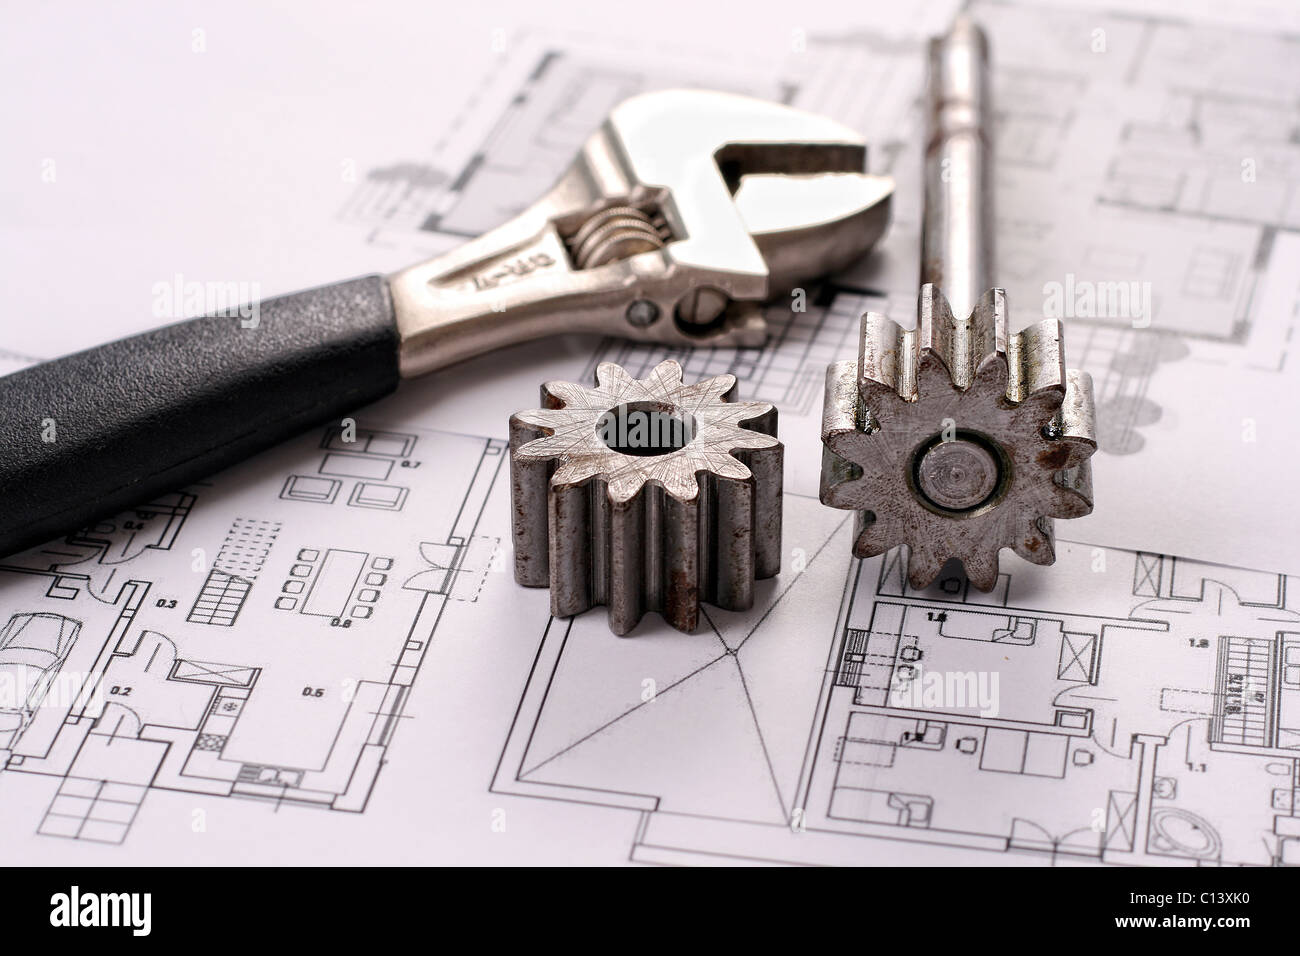 Tools on Blueprints including sprocked stacks and monkey wrench. House plans printed on white paper. Stock Photo